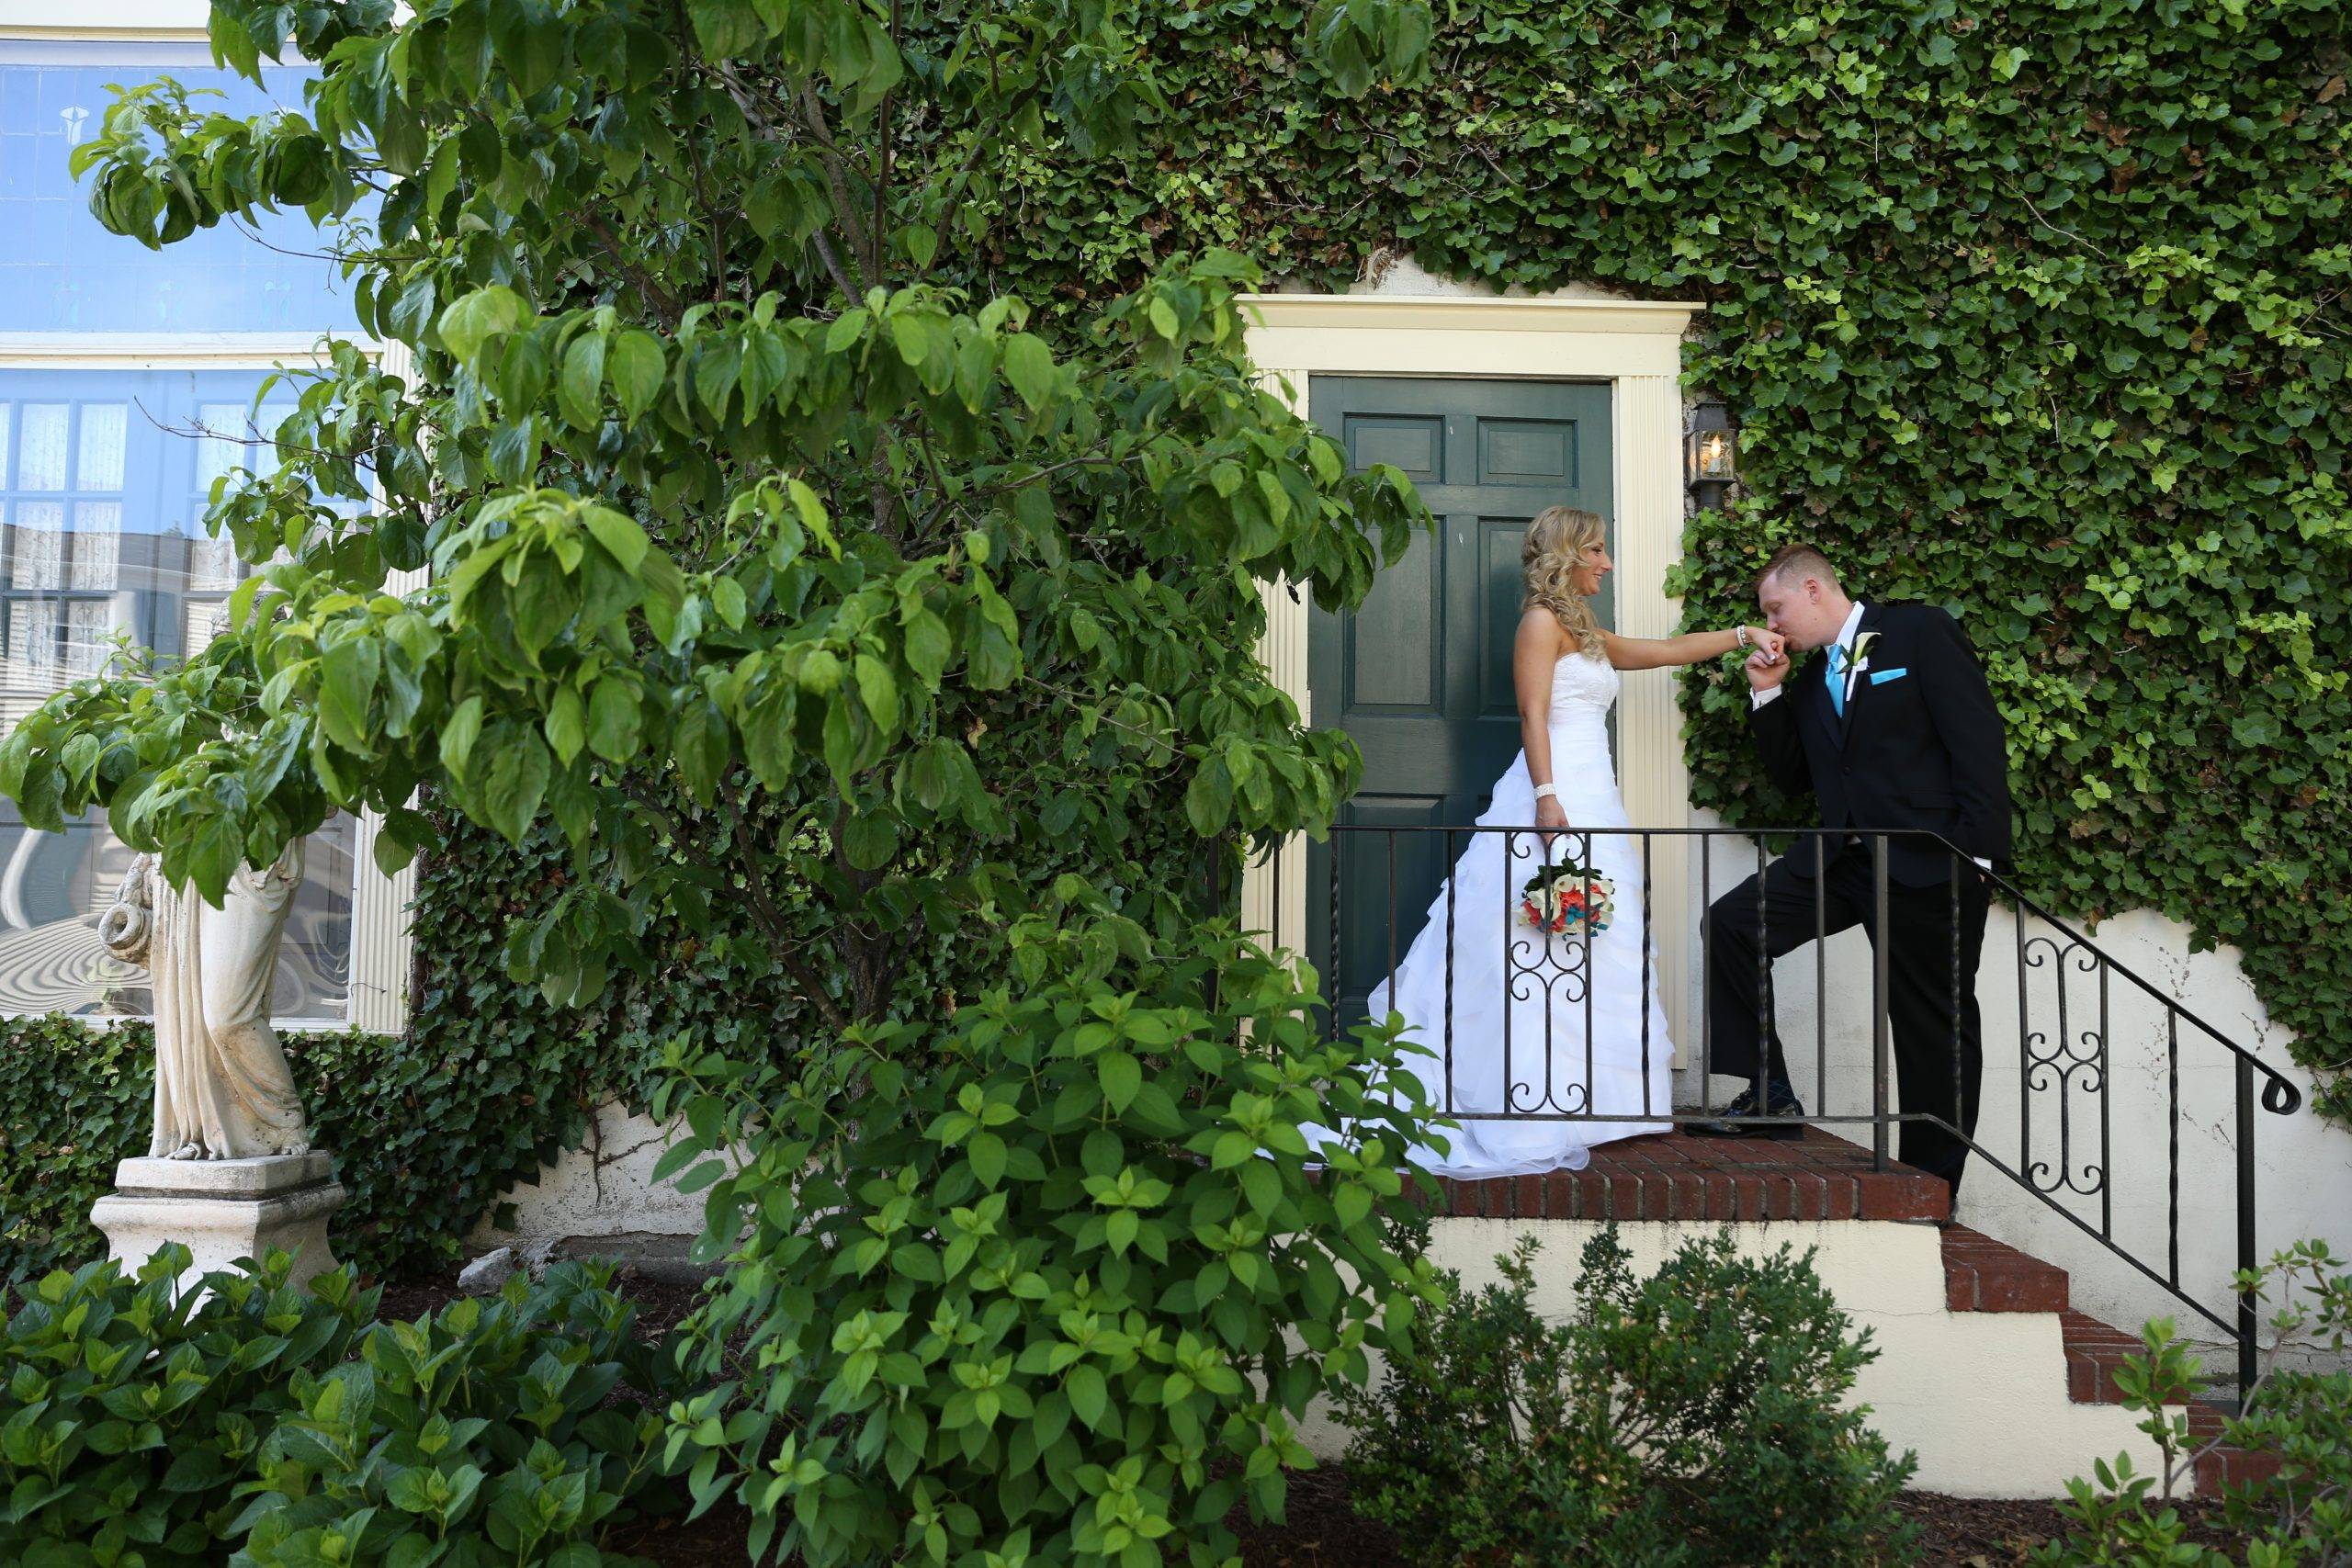 A bride and groom kissing on the steps of a house.